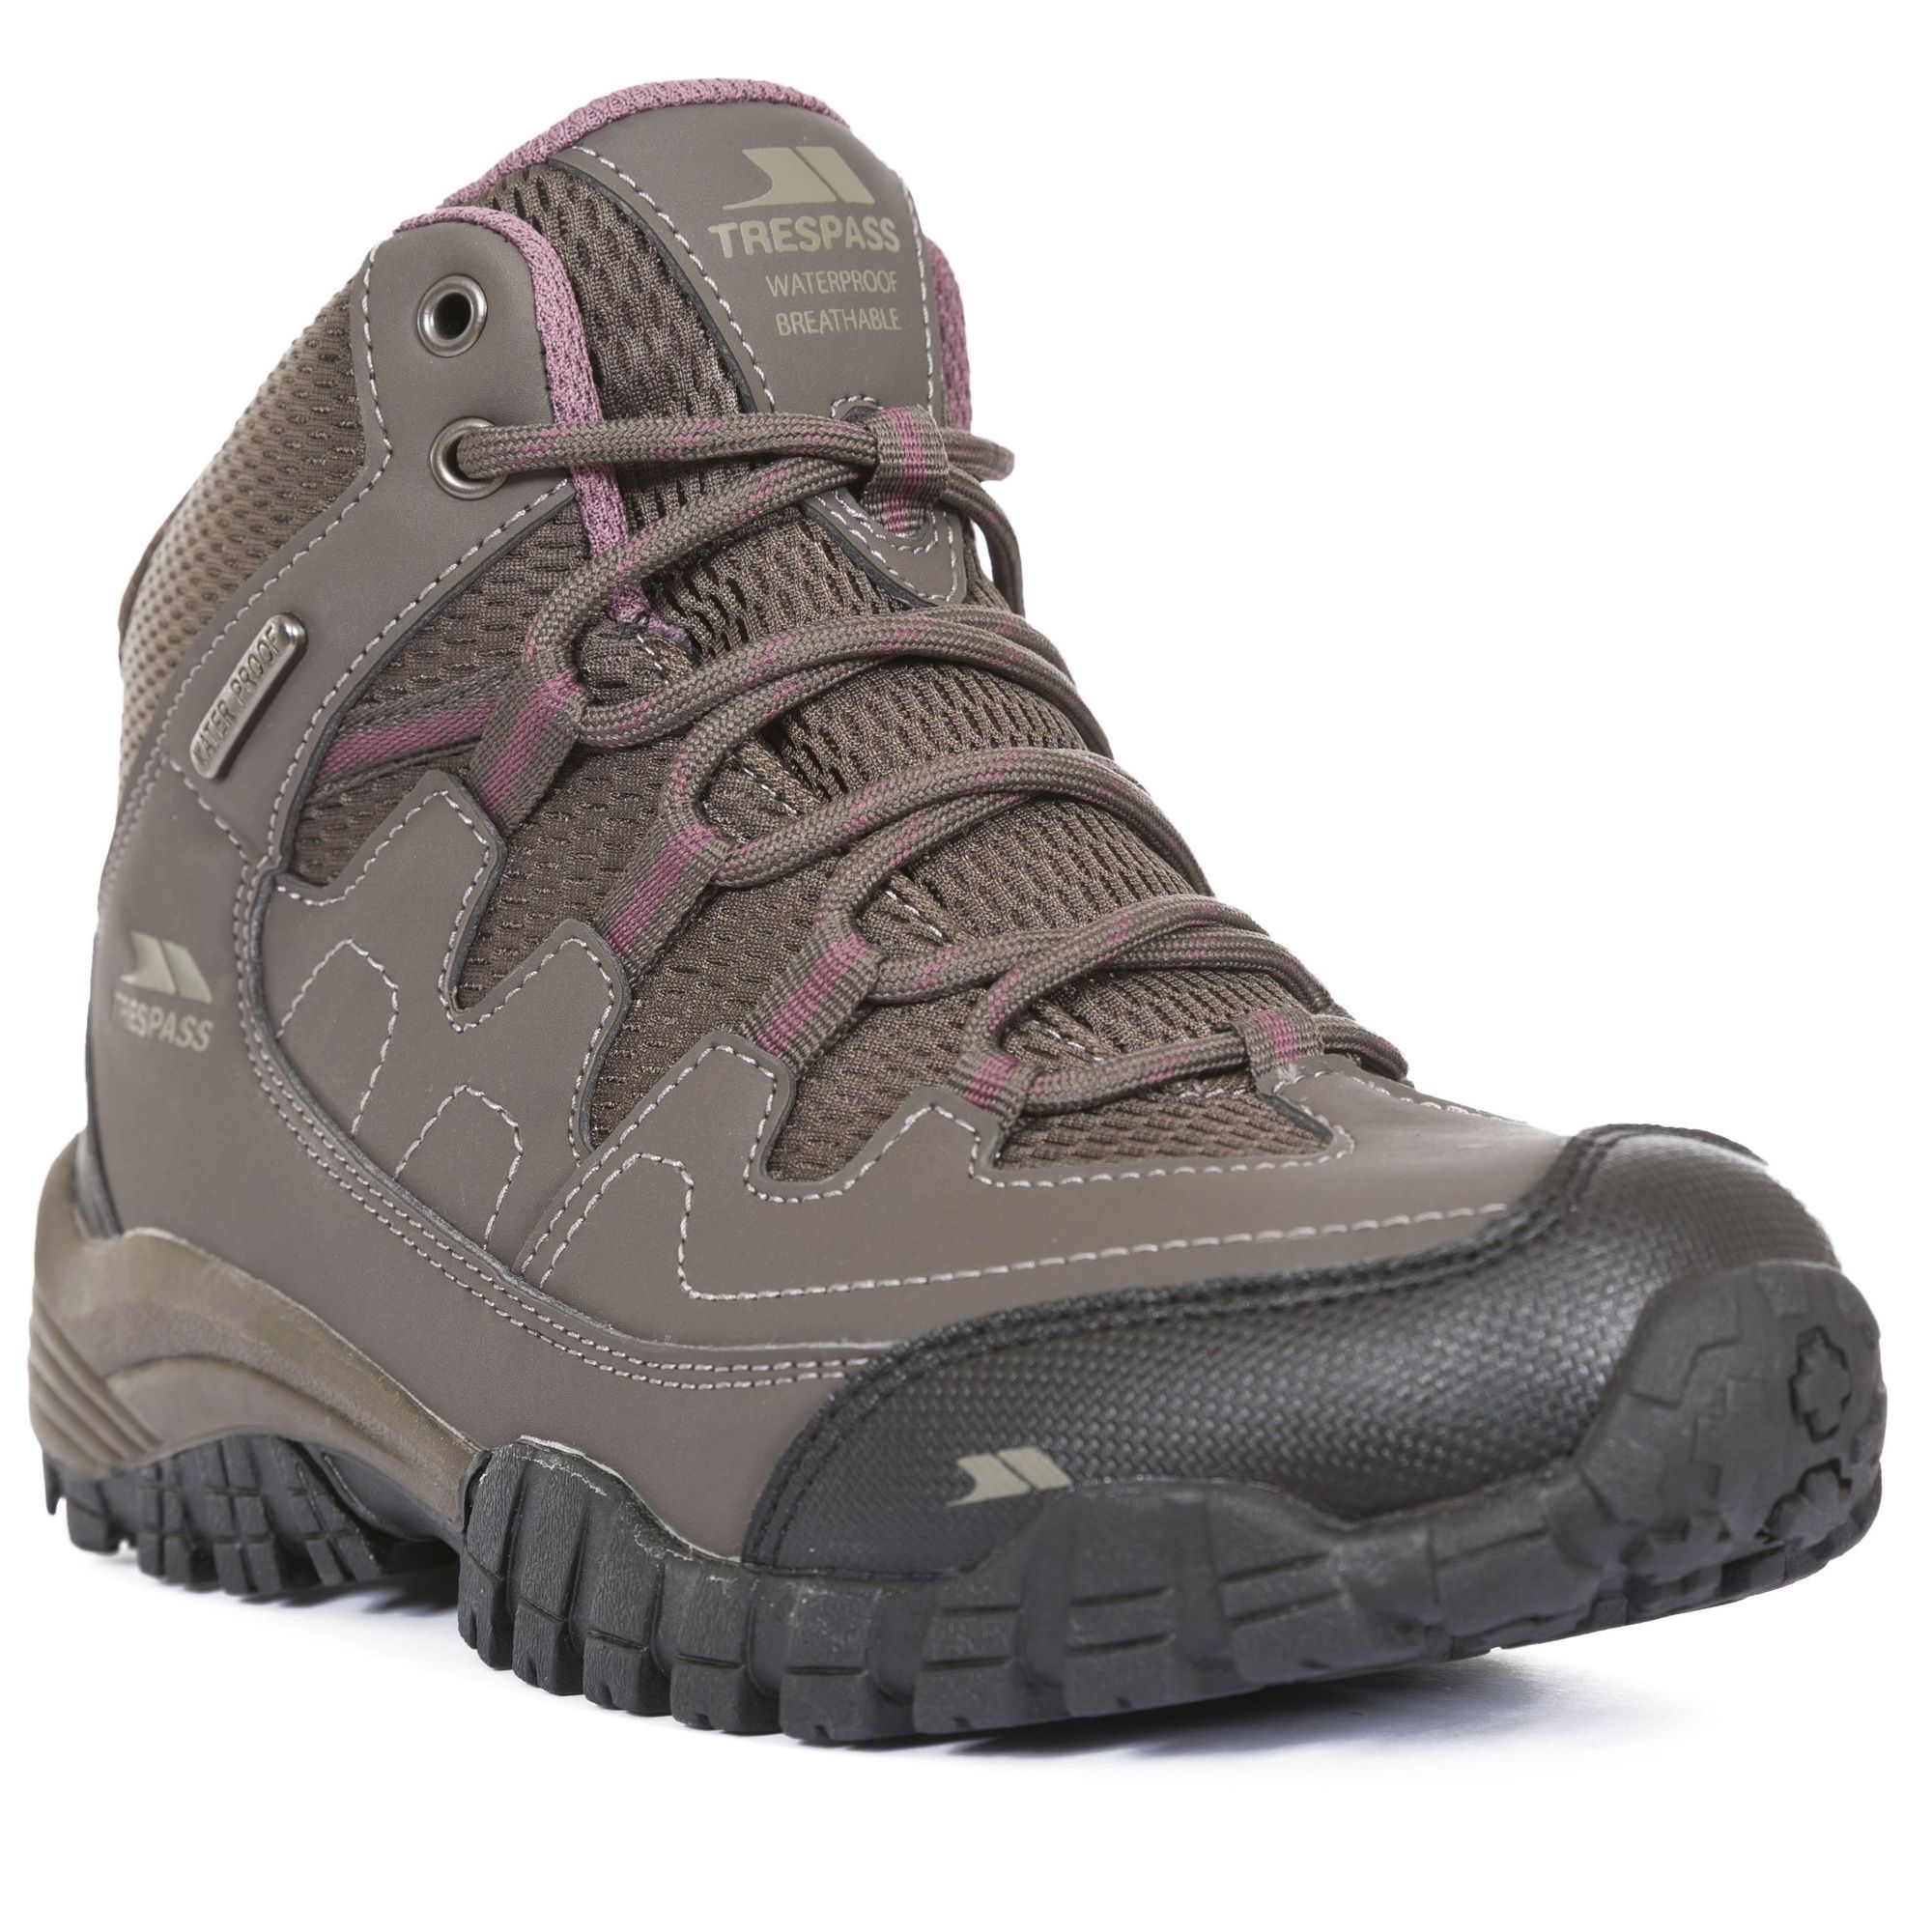 Mid cut walking boot. Waterproof and breathable membrane. Ankle supportive cushioned collar and tongue. Protective and durable toe and heel guard. Arch stabilising and supportive steel shank. Upper: PU/mesh. Lining: mesh. Insole: EVA. Outsole: rubber/TPR.